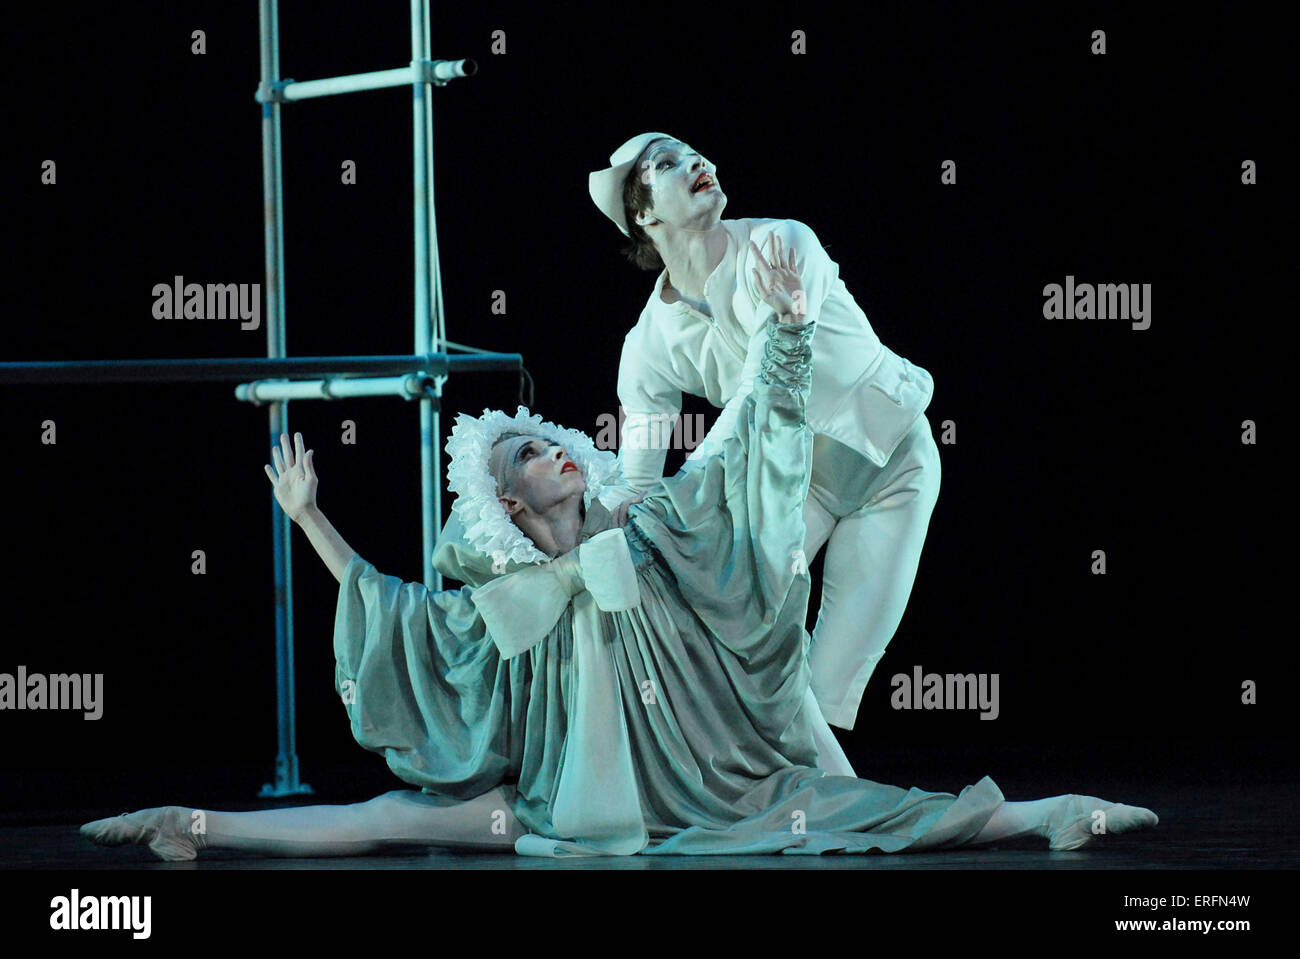 Arnold Schoenberg 's ballet 'Pierrot Lunaire' - Alexander Zaitsev as Pierrot and Mara Galeazzi as Columbine in a production at Stock Photo